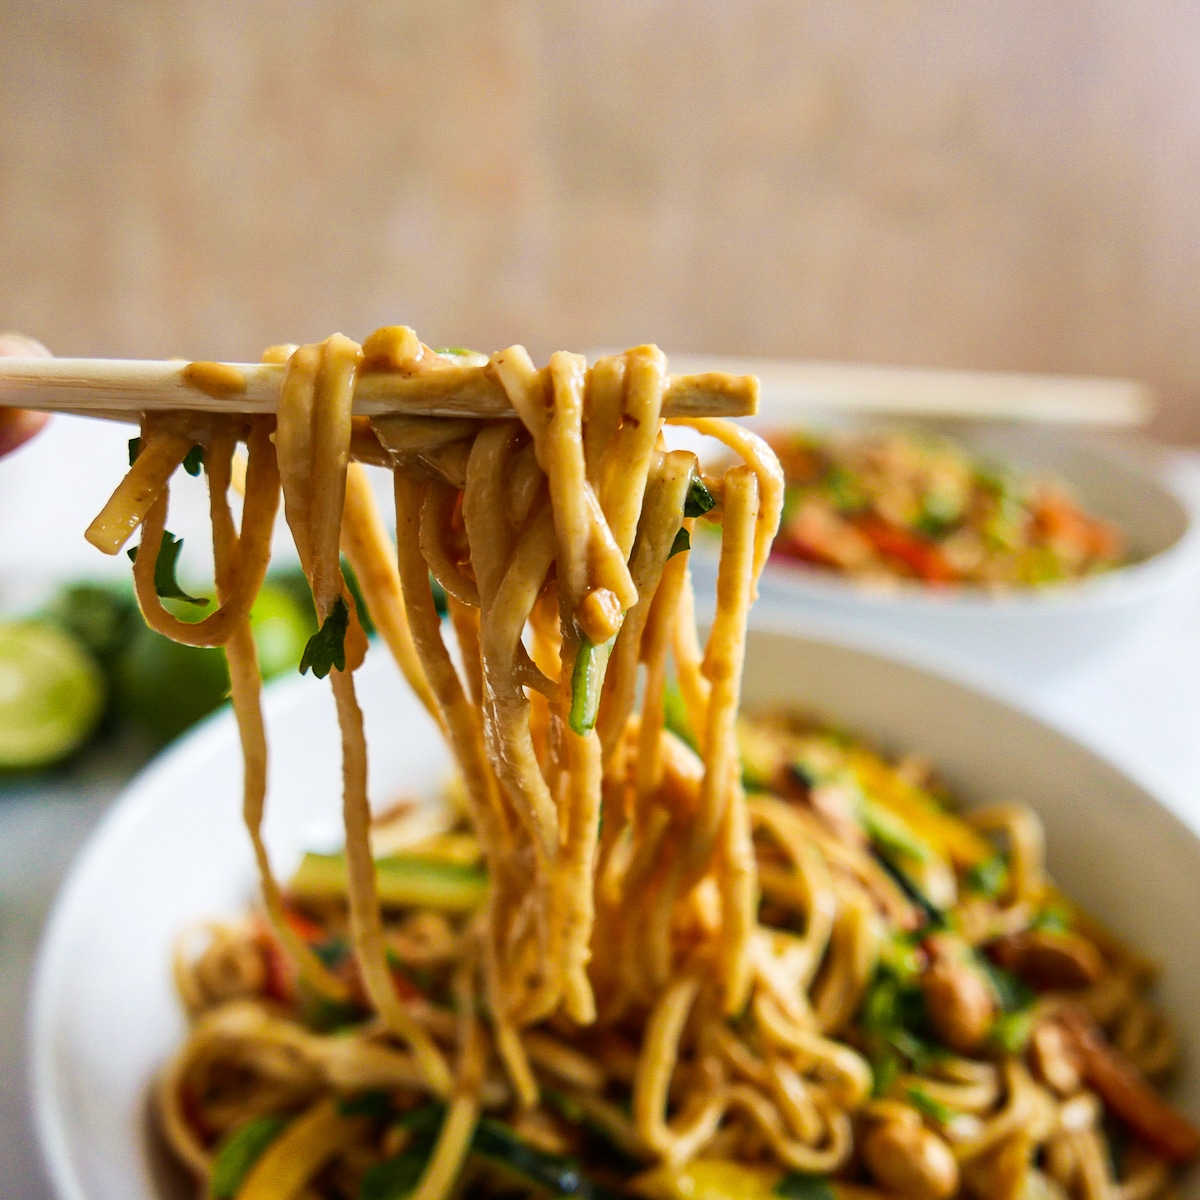 Chopsticks holding up spicy peanut noodles from bowl.